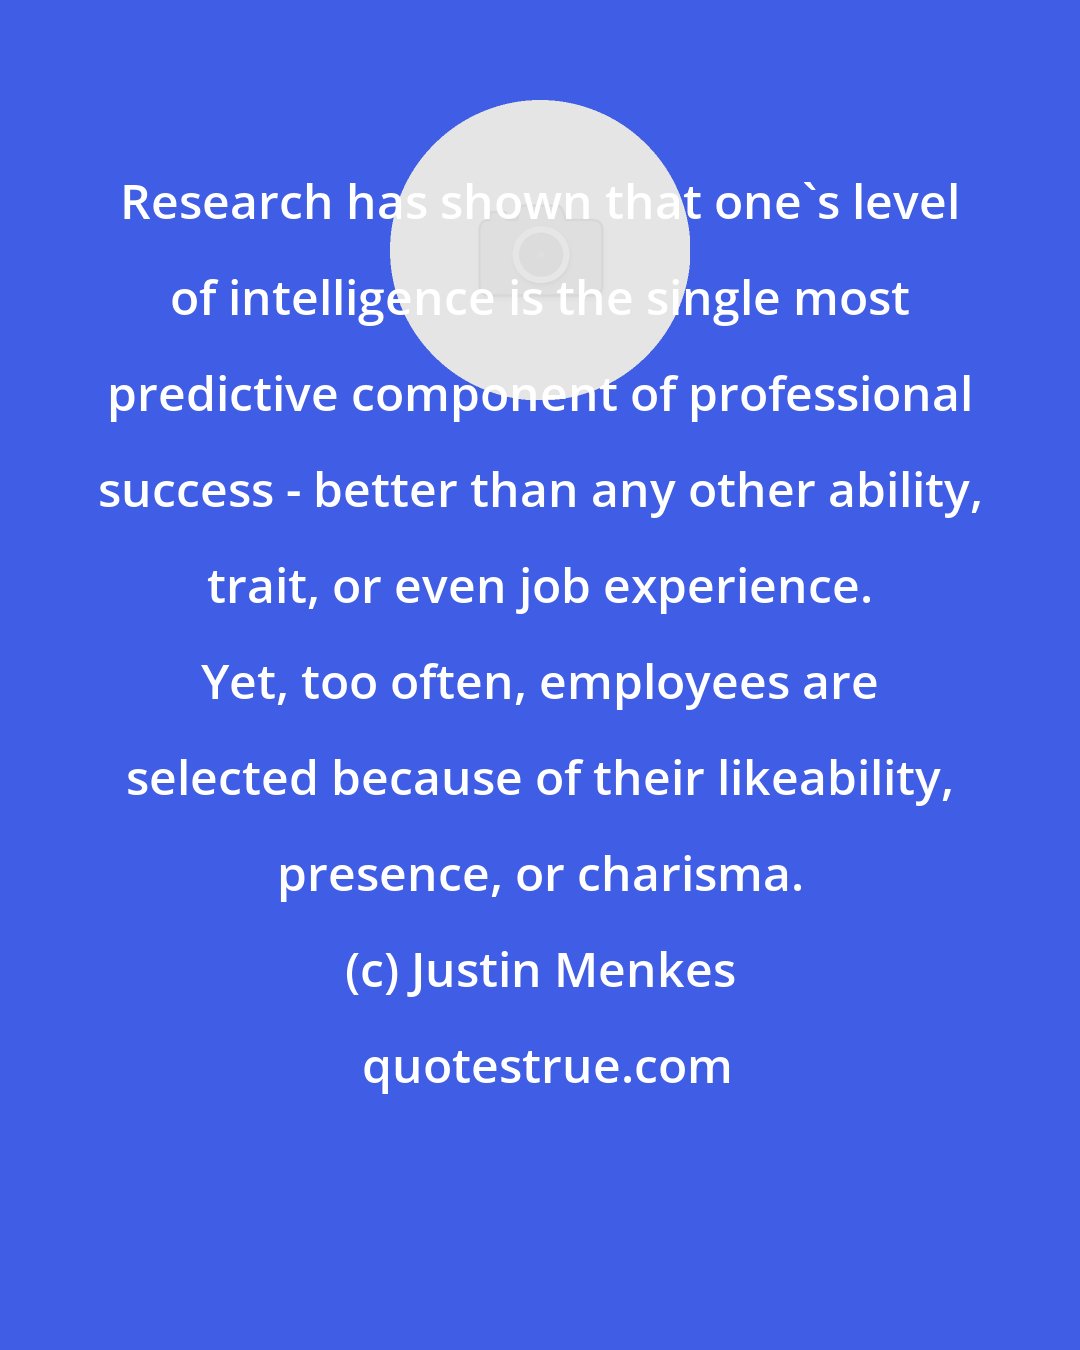 Justin Menkes: Research has shown that one's level of intelligence is the single most predictive component of professional success - better than any other ability, trait, or even job experience. Yet, too often, employees are selected because of their likeability, presence, or charisma.